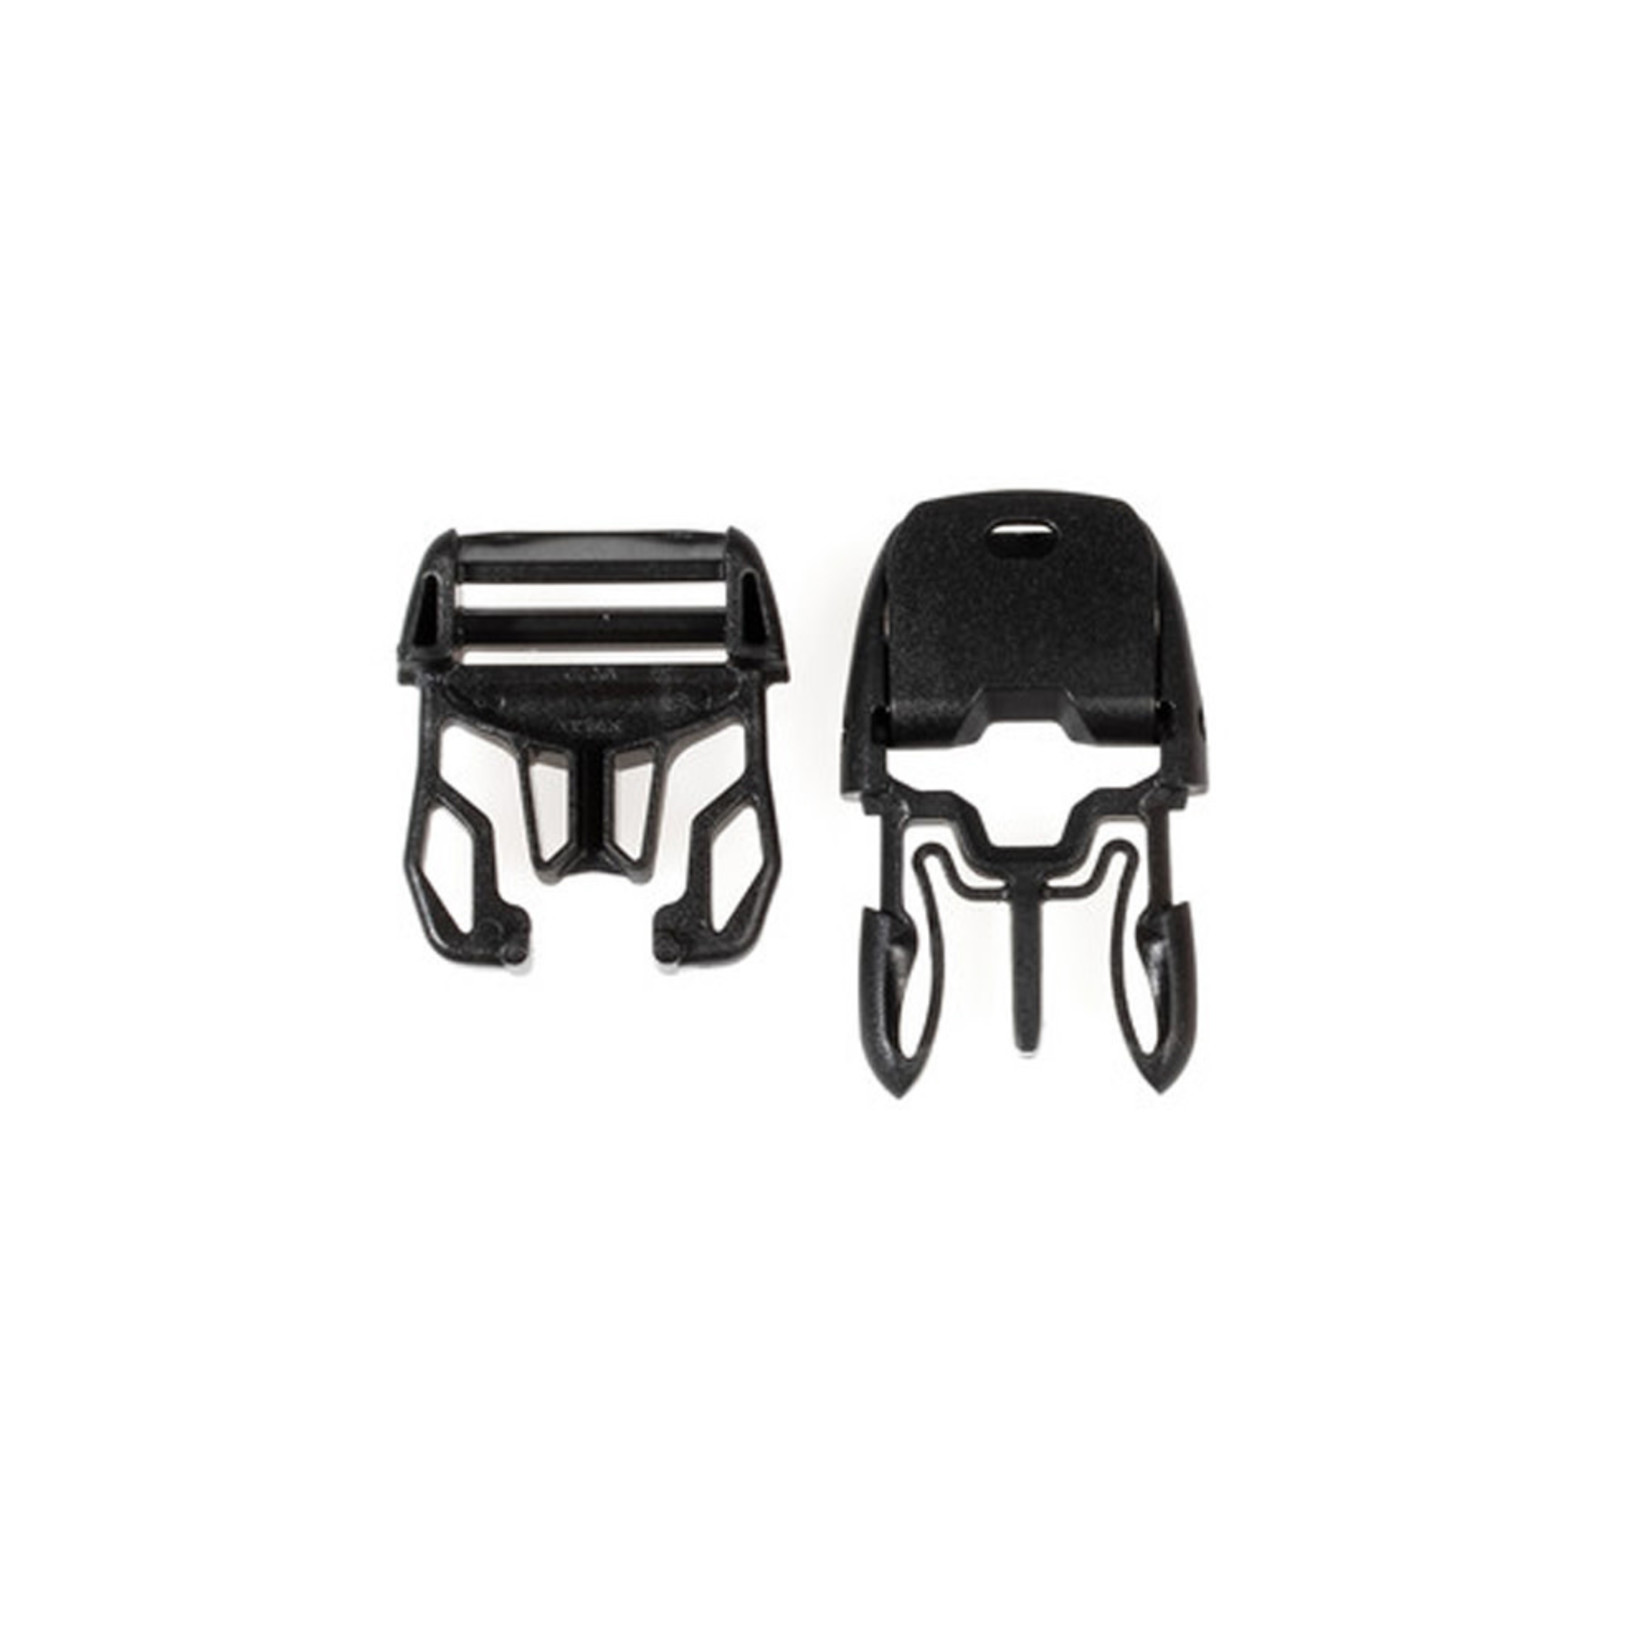 Ortlieb New Ortlieb Connector Seat-Pack Plug With Webbing Safety Device 0 E230 - Black